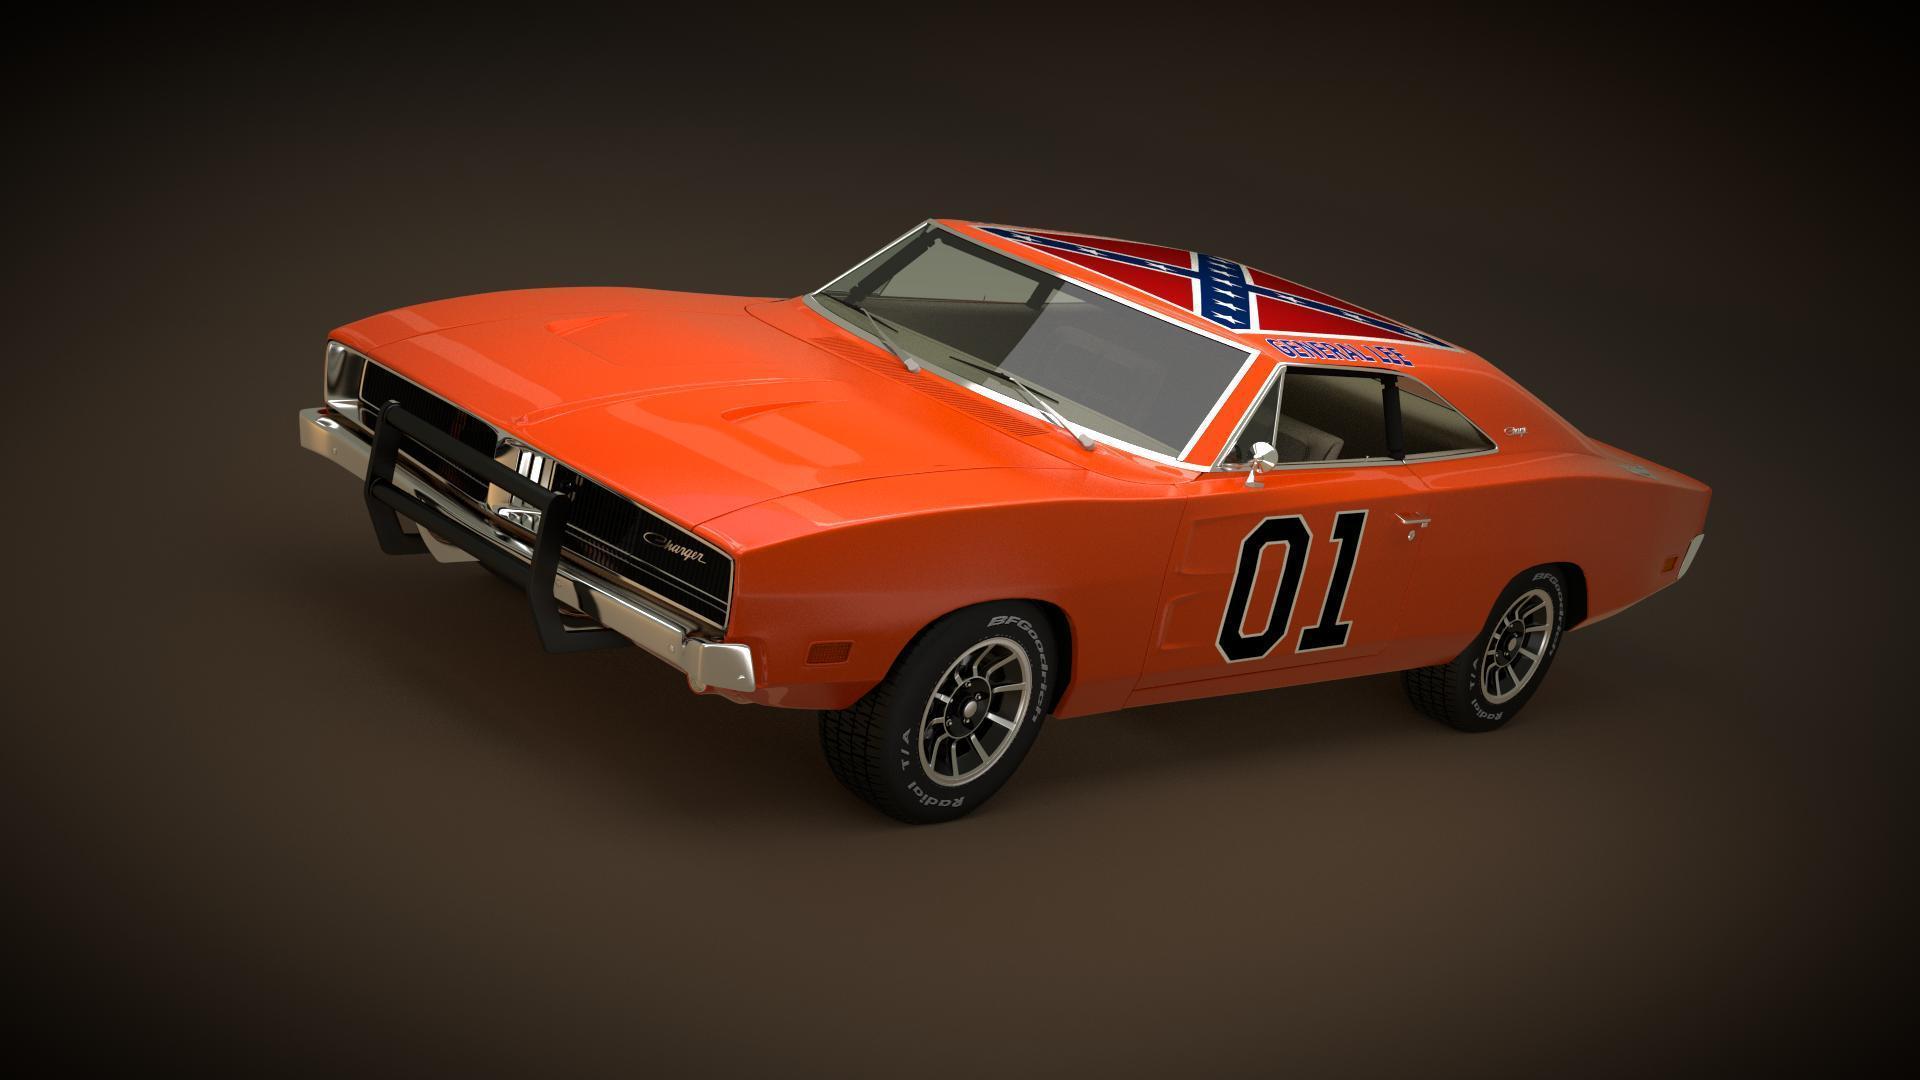 The Dukes of Hazzard Dodge Charger